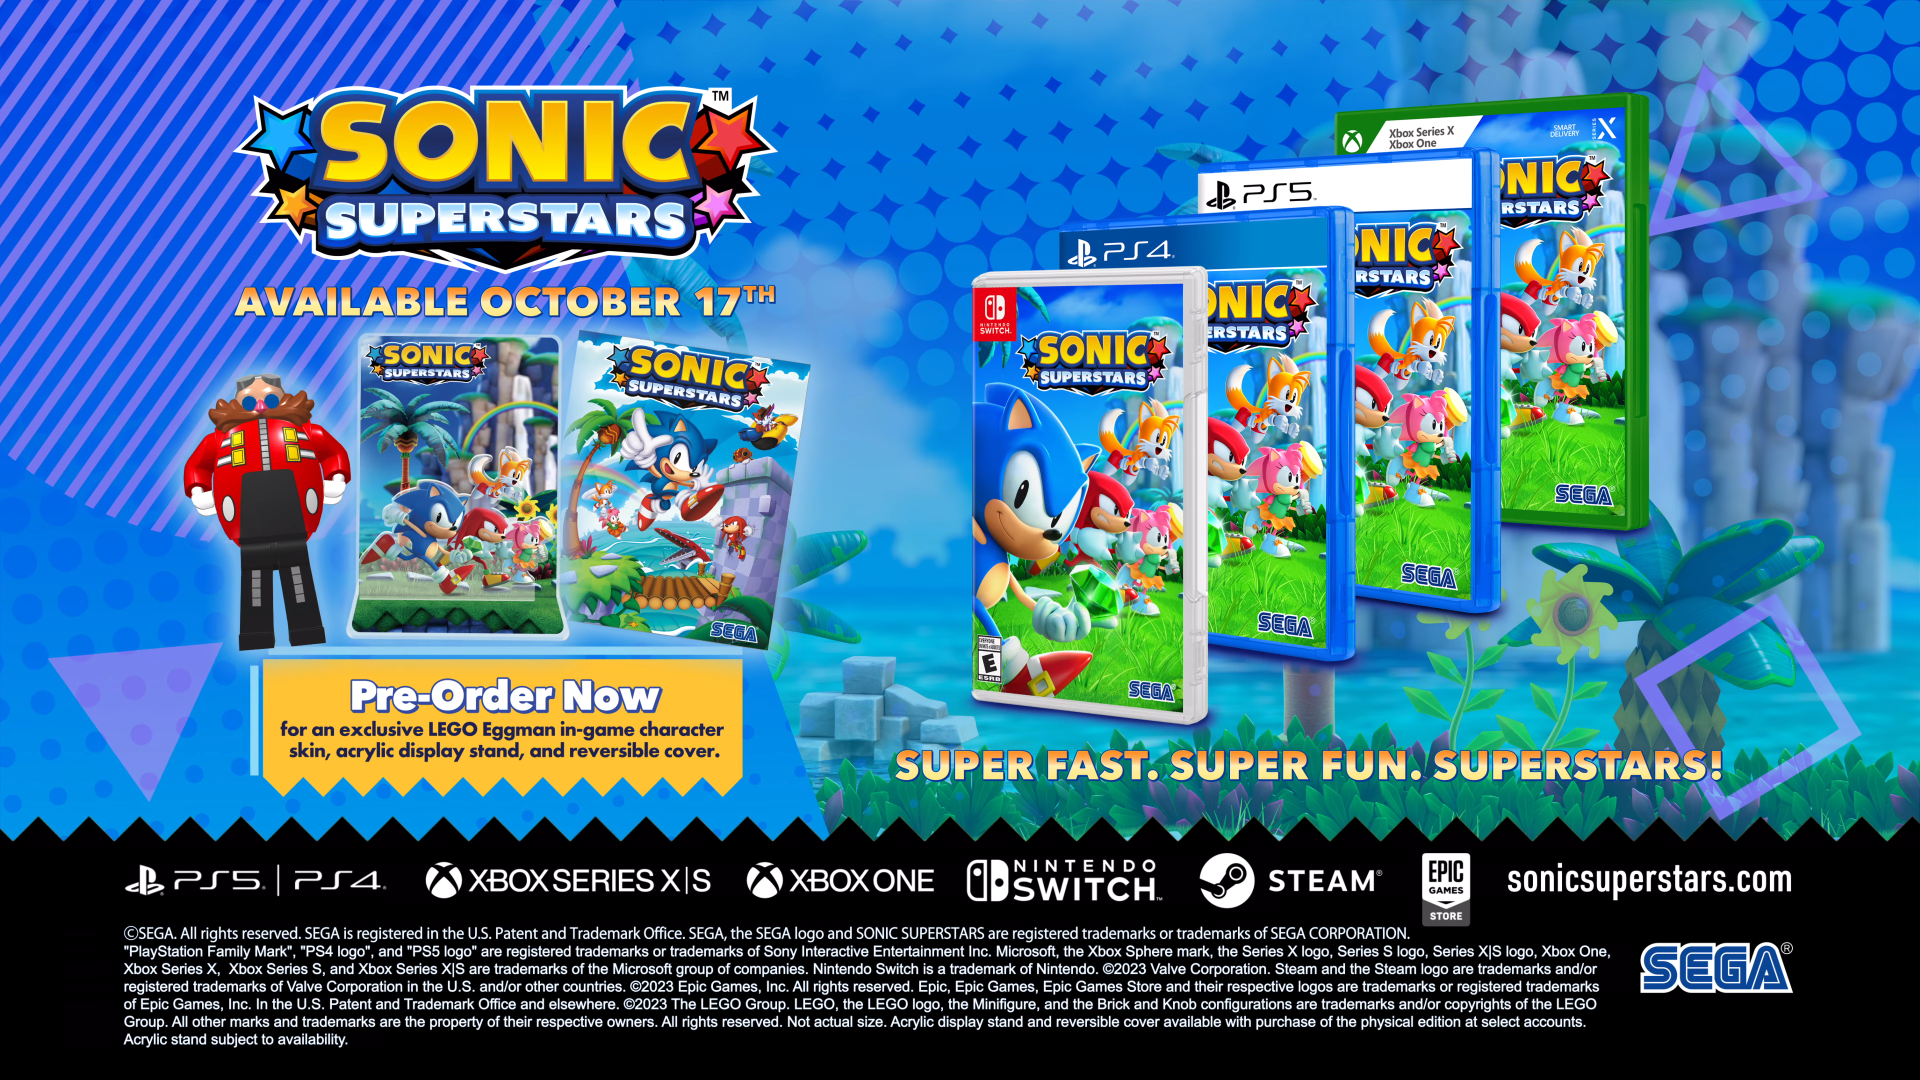 Sonic Superstars - LEGO® Sonic Skin for Free - Epic Games Store